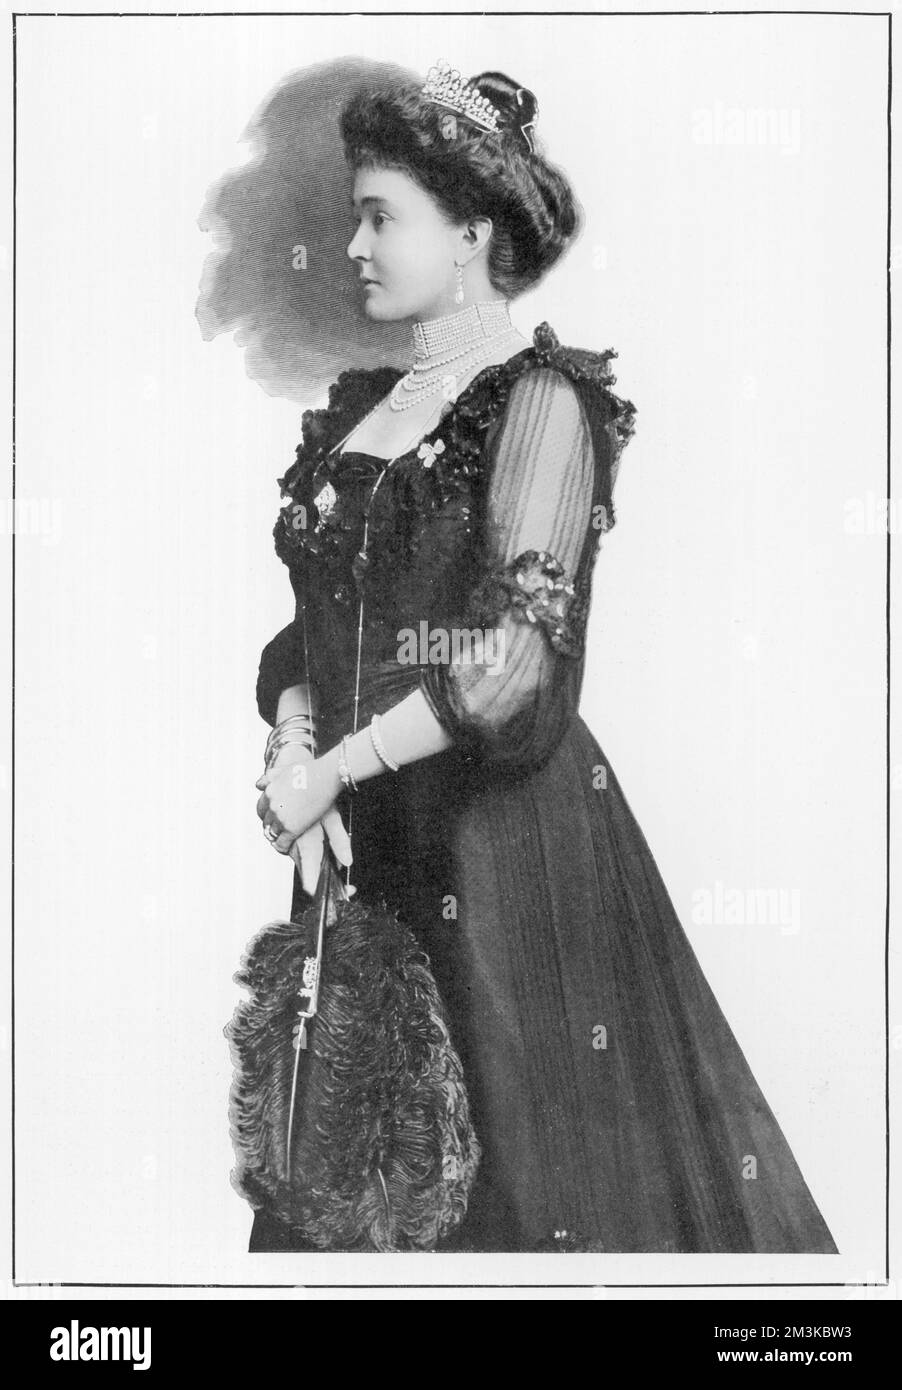 Princess Luise Margarete of Prussia, Duchess of Connaught (1860-1917), wife of Prince Arthur, Duke of Connaught.     Date: 1902 Stock Photo